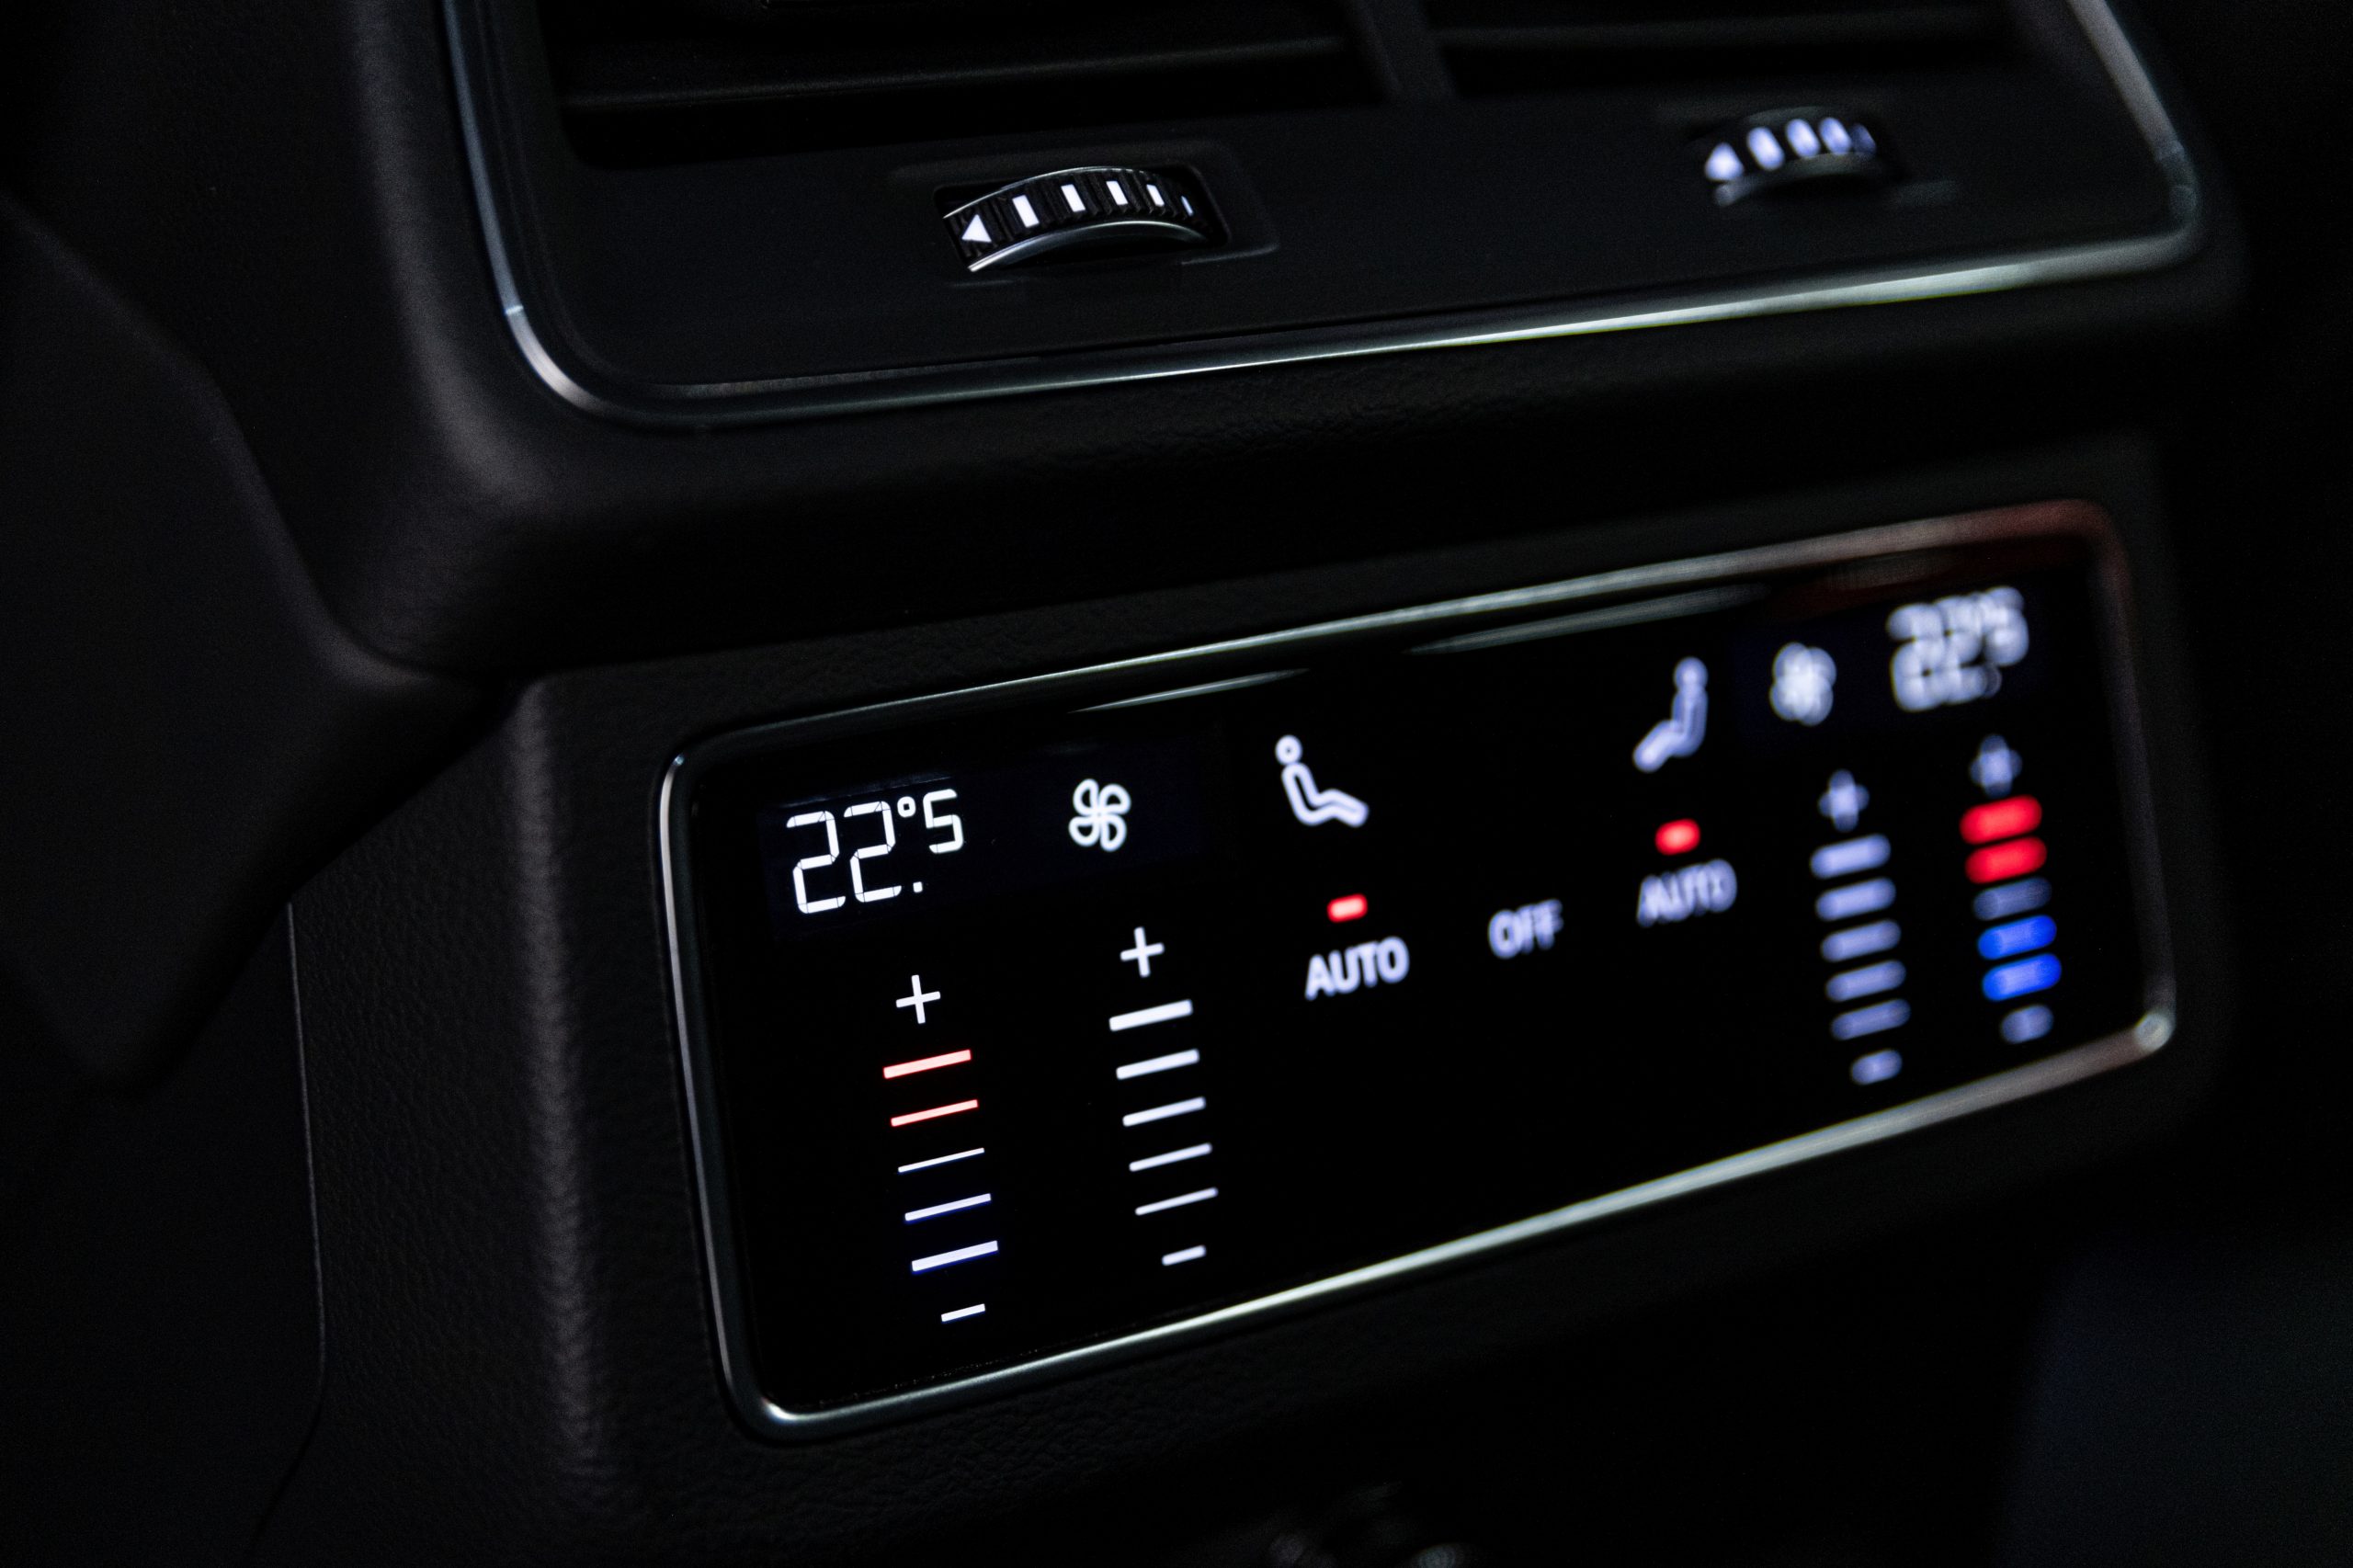 Air conditioning control panel in modern luxury car